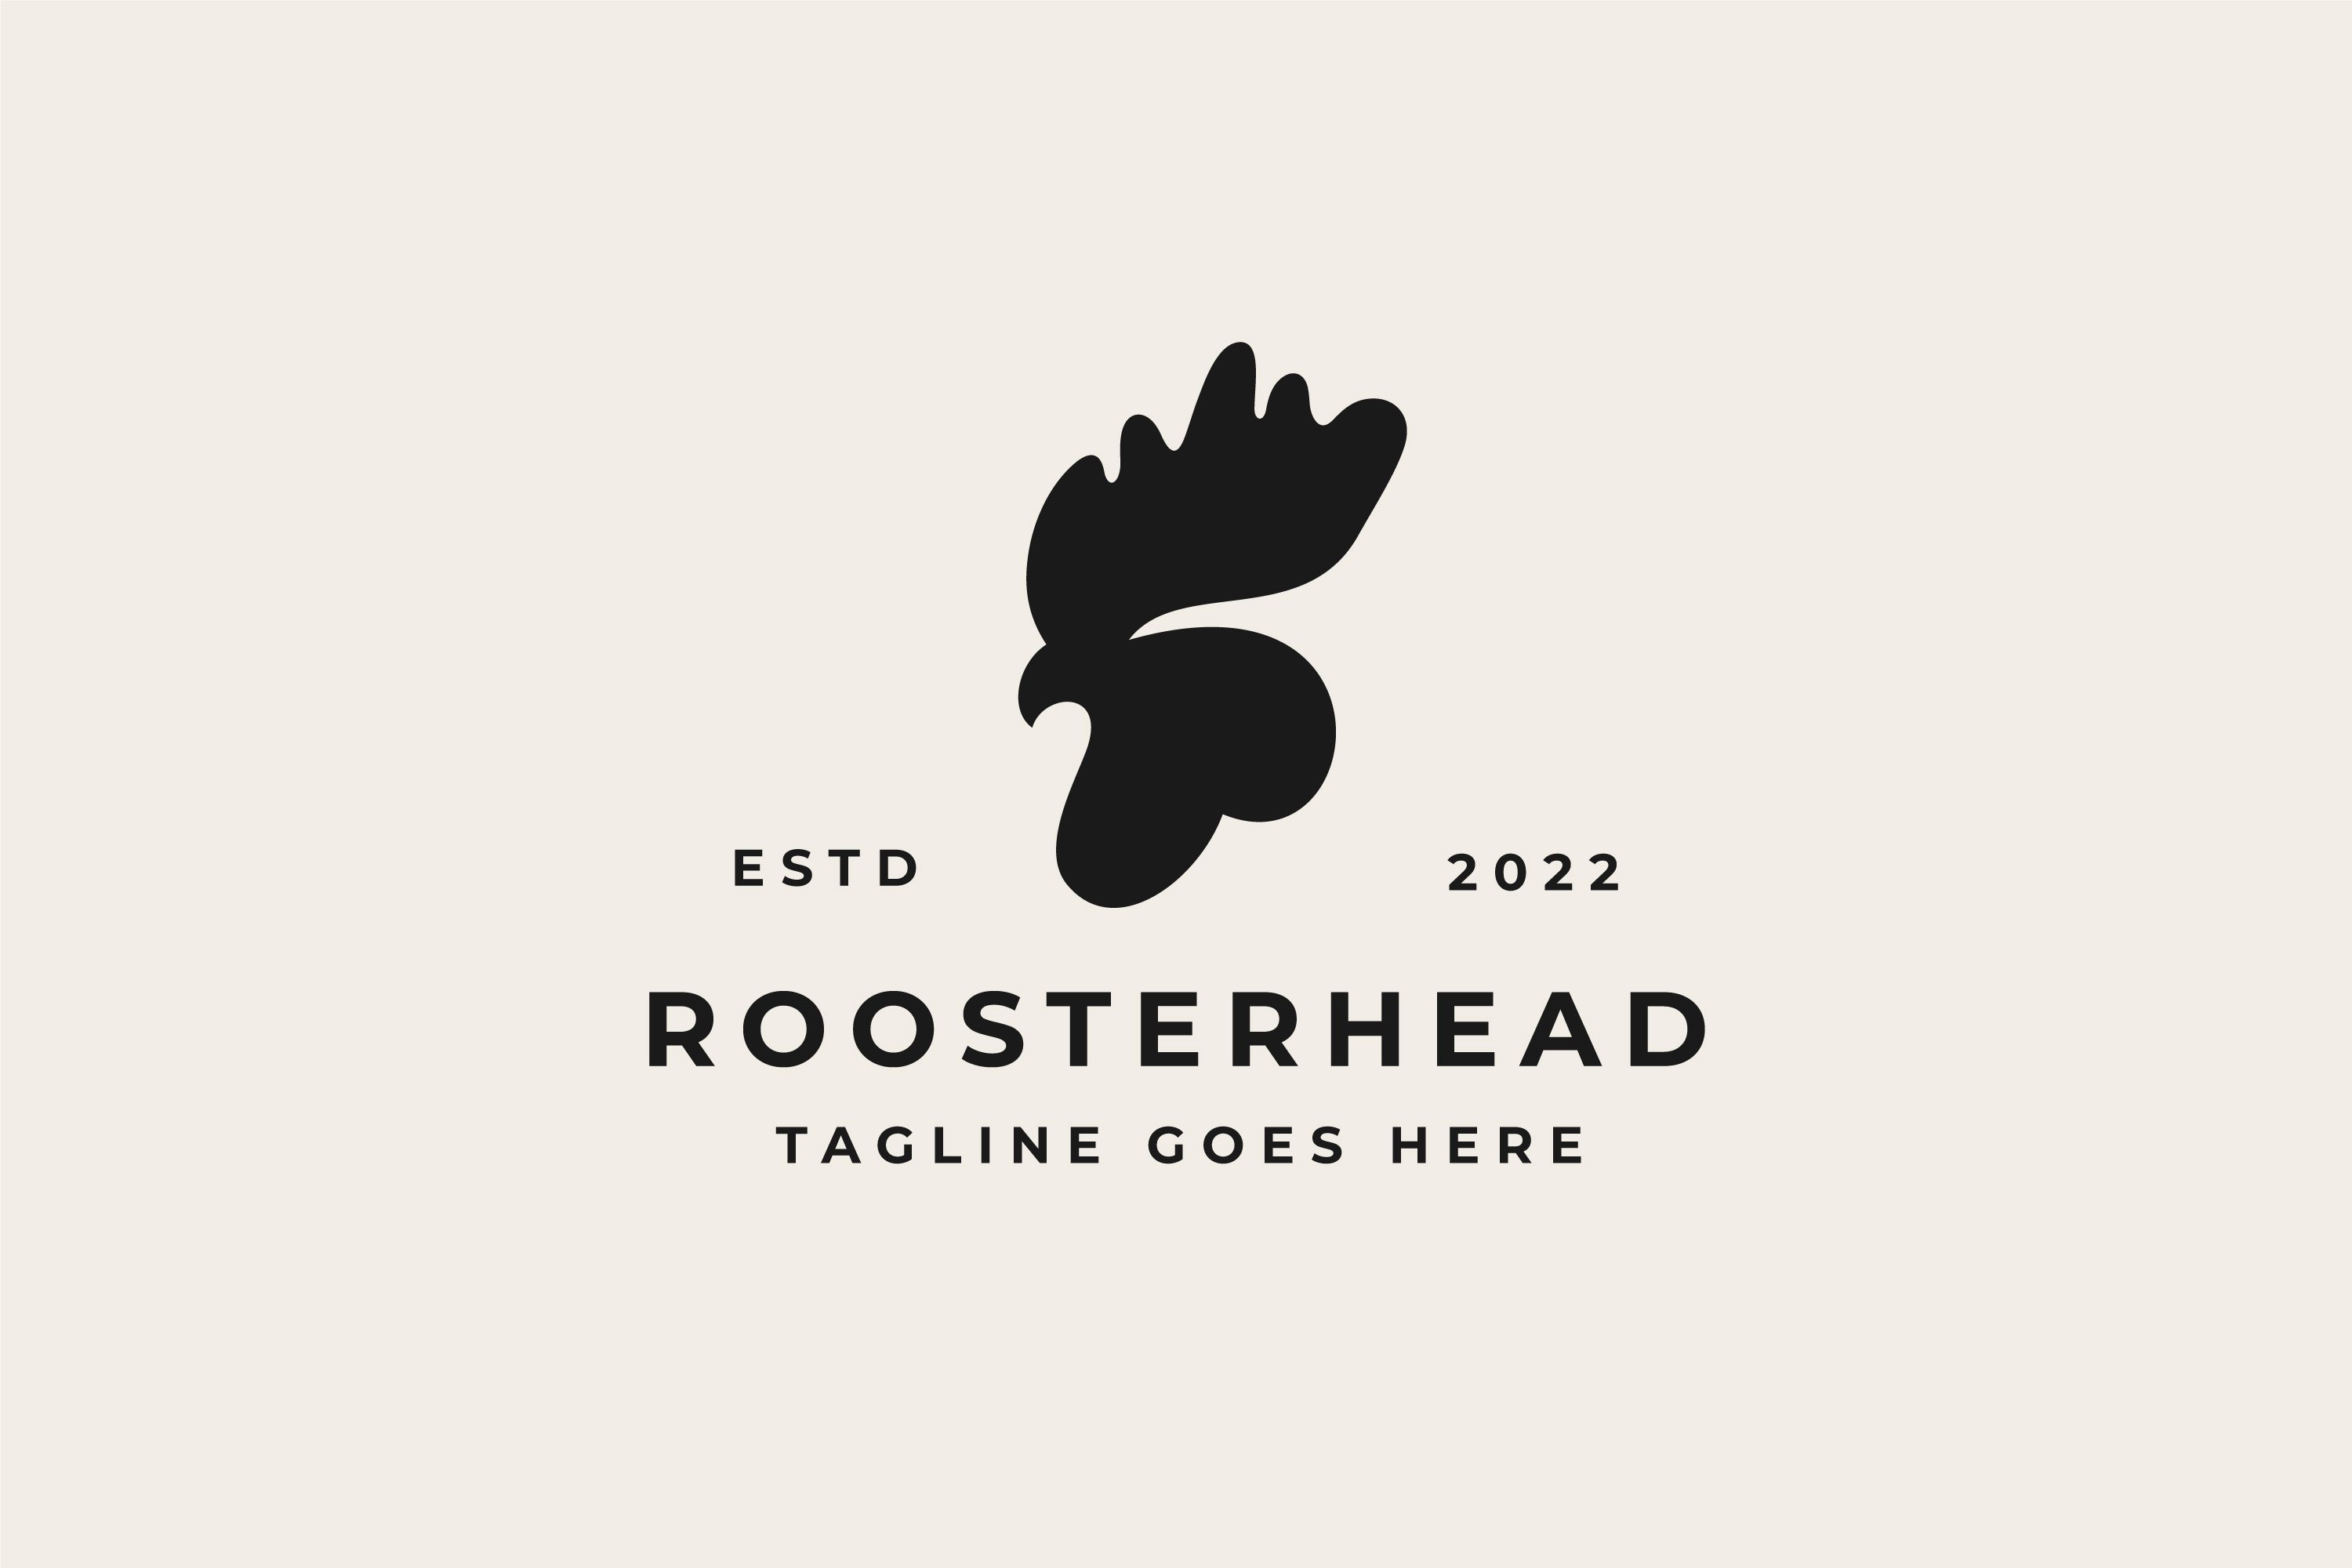 Retro Hipster Rooster Head Logo cover image.